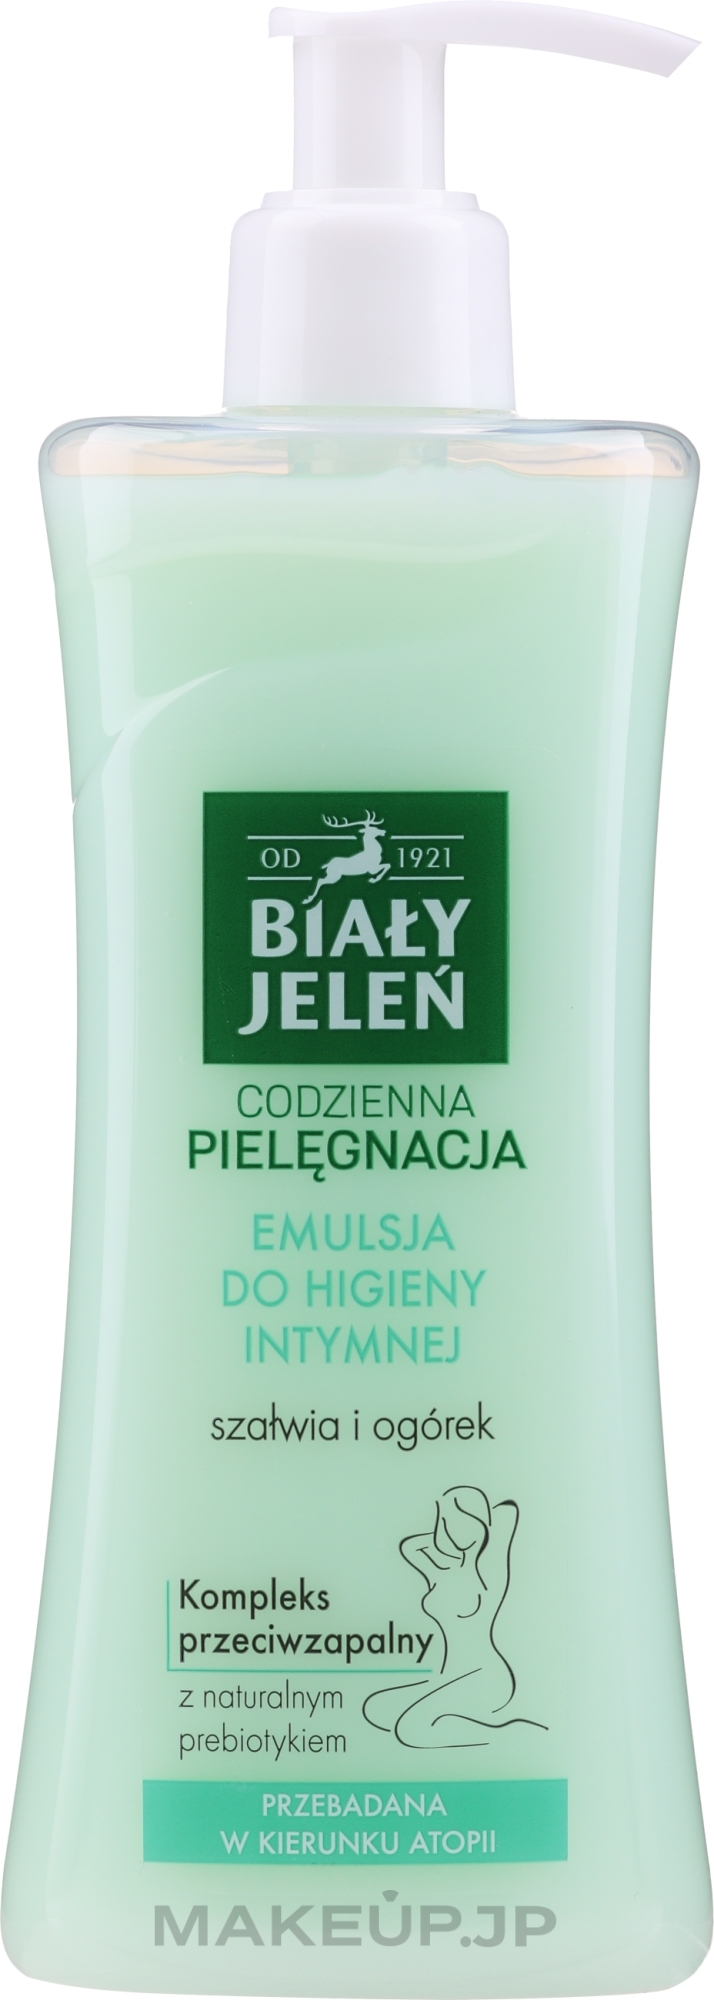 Hypoallergenic Emulsion for Intimate Hygiene with Sage and Cucumber - Bialy Jelen Hypoallergenic Emulsion For Intimate Hygiene — photo 265 ml